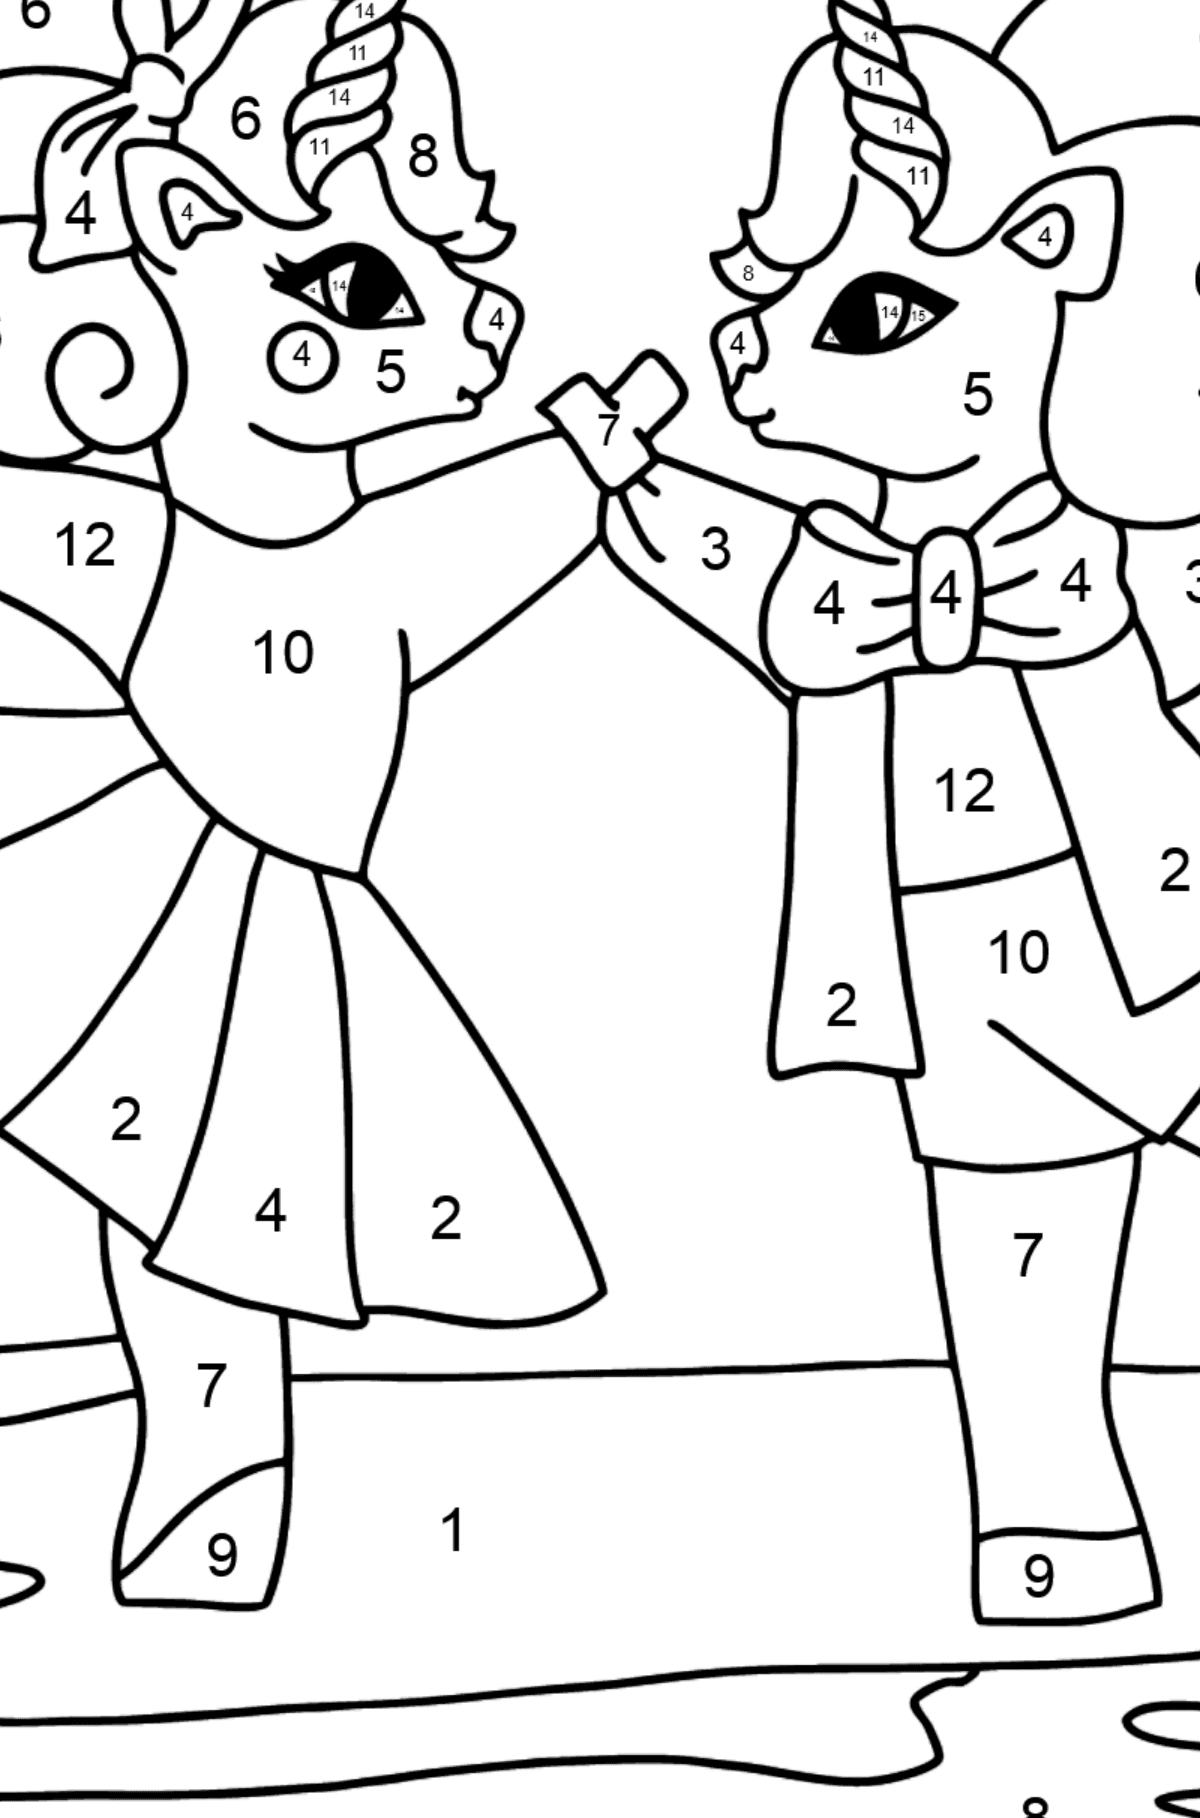 Coloring page Adorable Unicorns - Coloring by Numbers for Kids